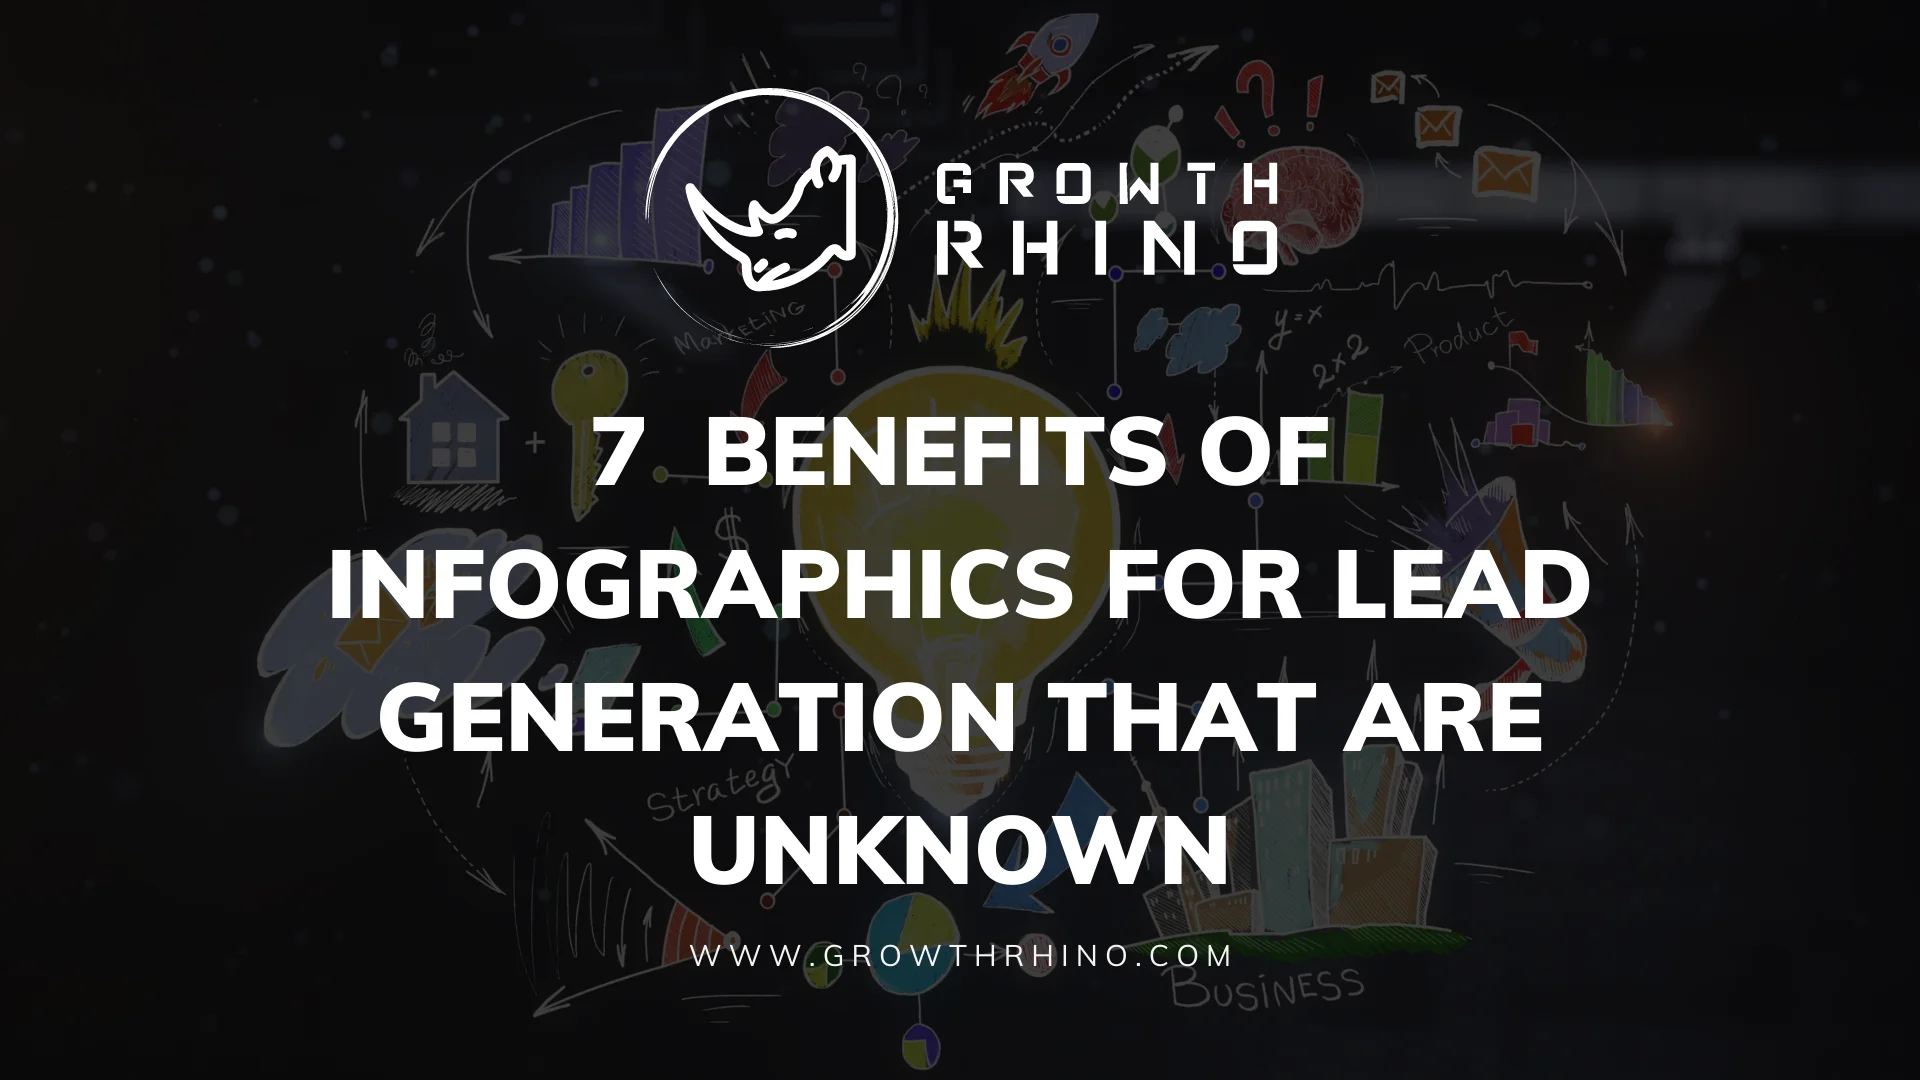 7 Benefits of Infographics for Lead Generation That Are Unknown